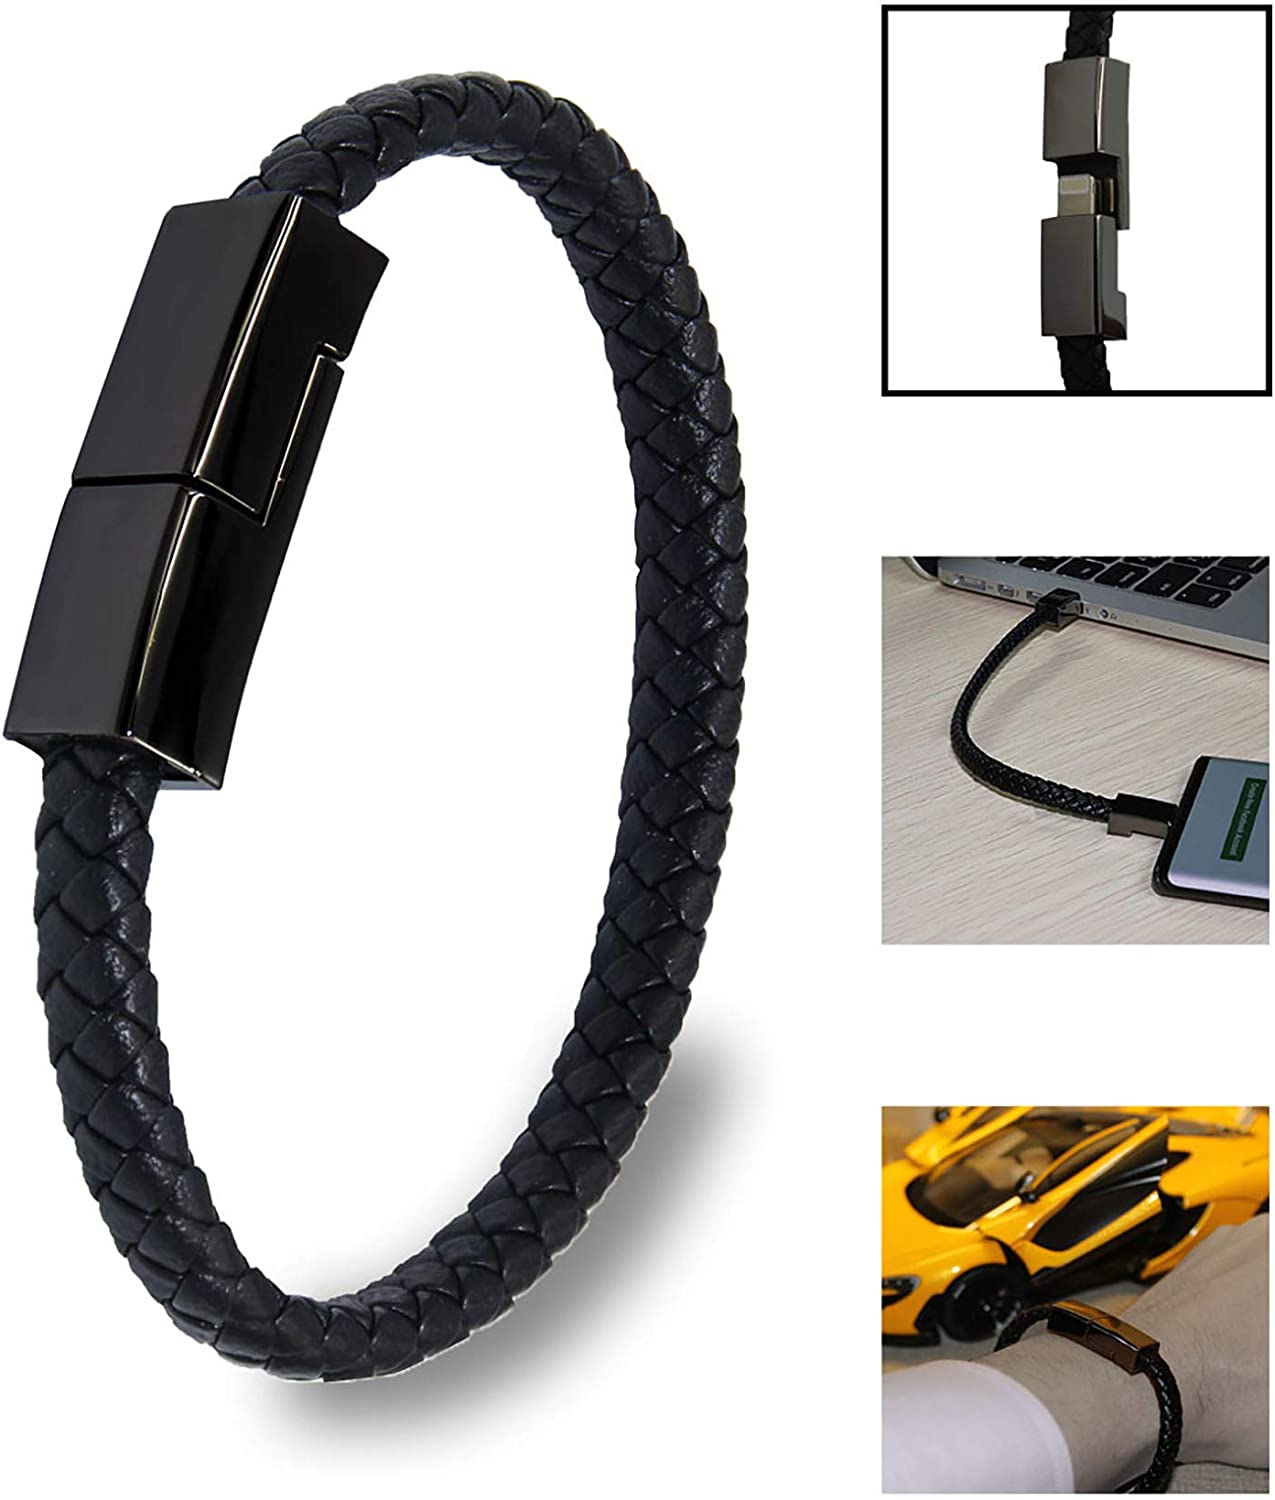 A collage of 4 photos. The main image is of a USB cell phone charging bracelet. The remaining 3 images are showing the bracelet being used in various situations.